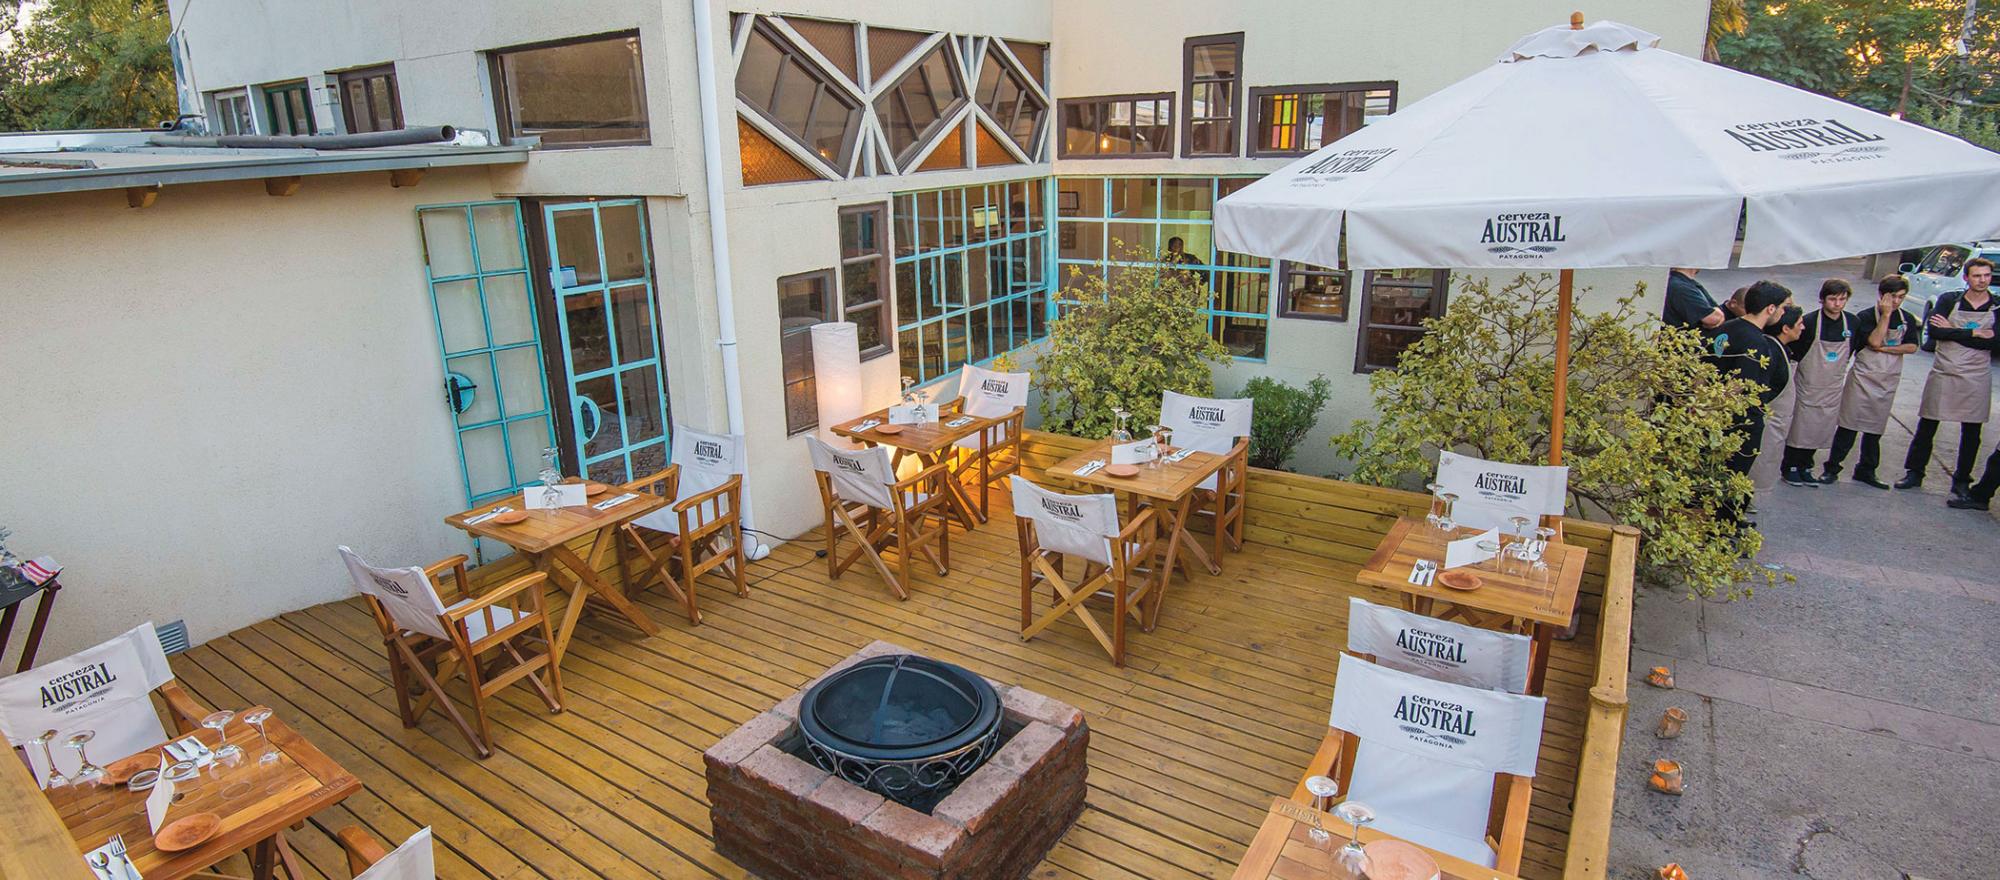 You can dine indoors or out at Santiago, Chile’s D.O. Restorán, whose menu reports the source of every fish, piece of meat and vegetable. (PHOTO: Diego Varas)